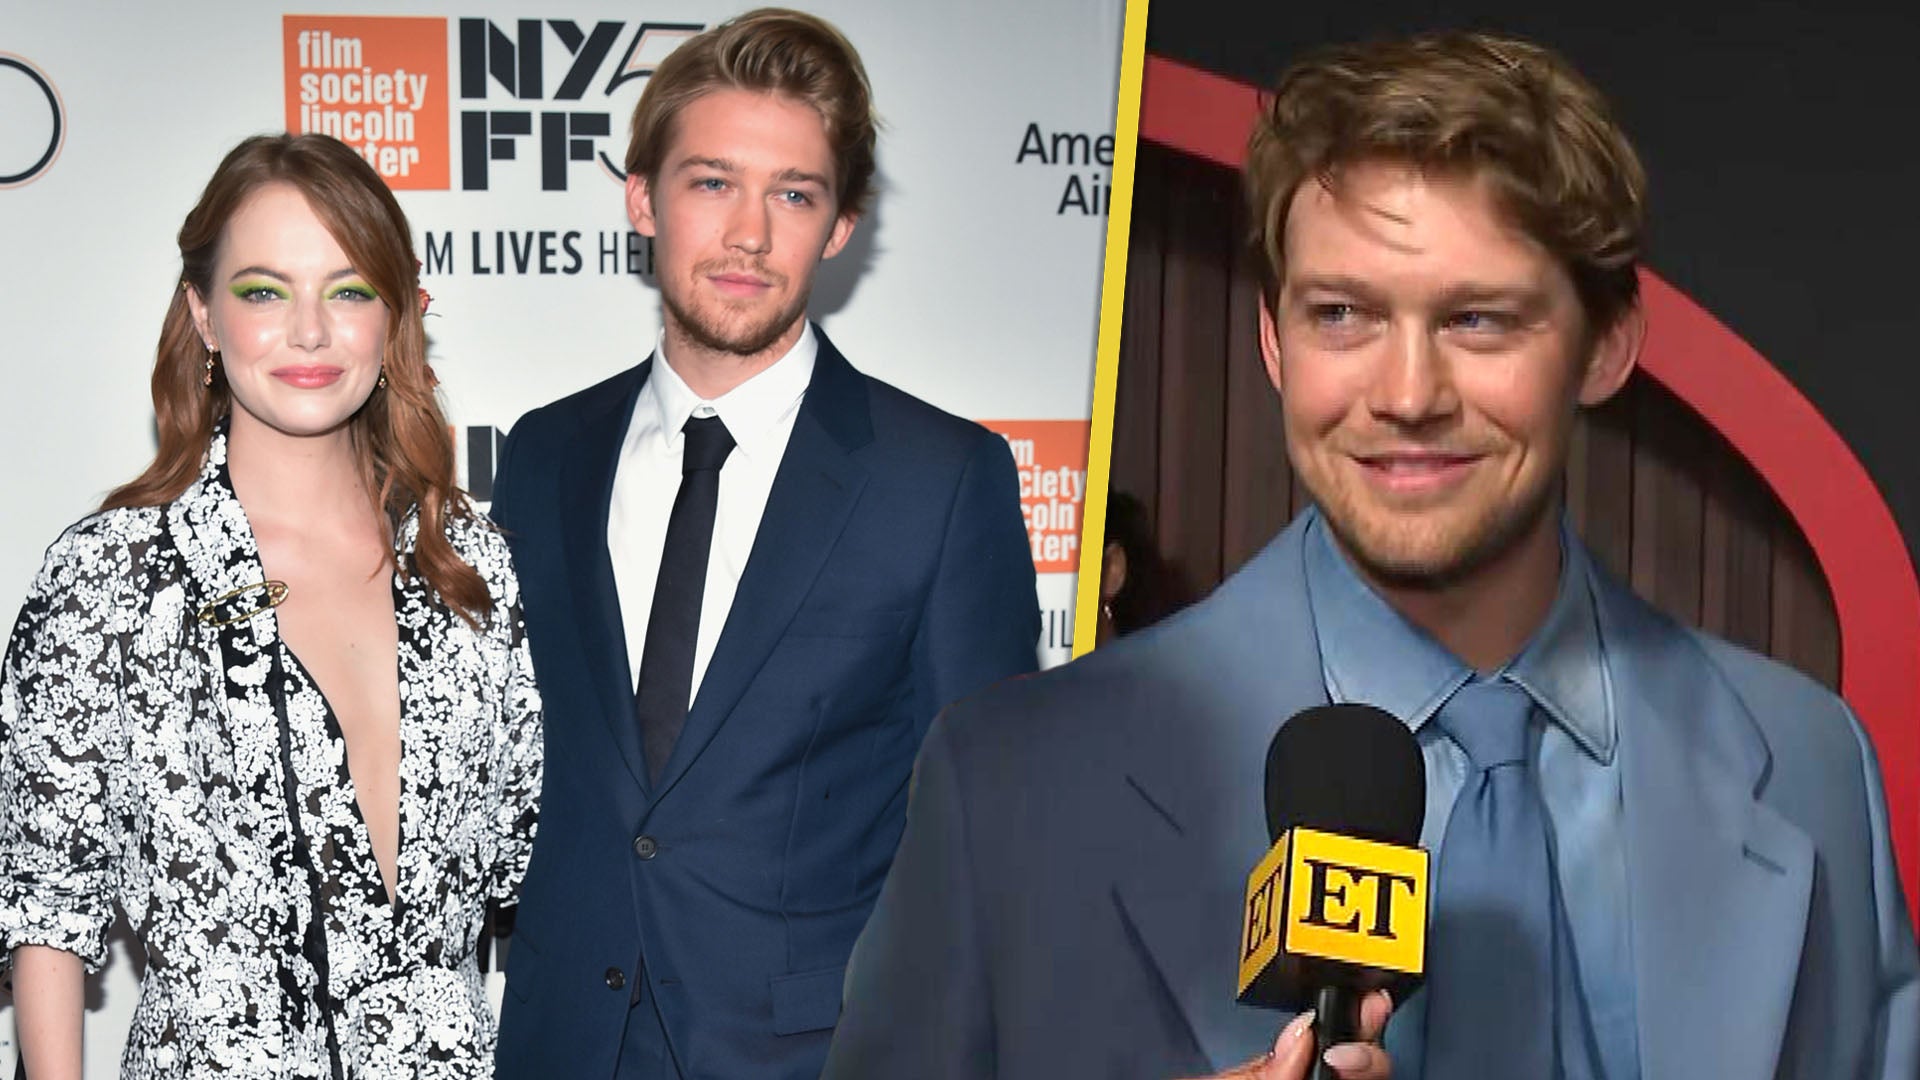 Joe Alwyn Says He’s 'Lucky to Be Close' to 'Kinds of Kindness' Co-Star Emma Stone (Exclusive)